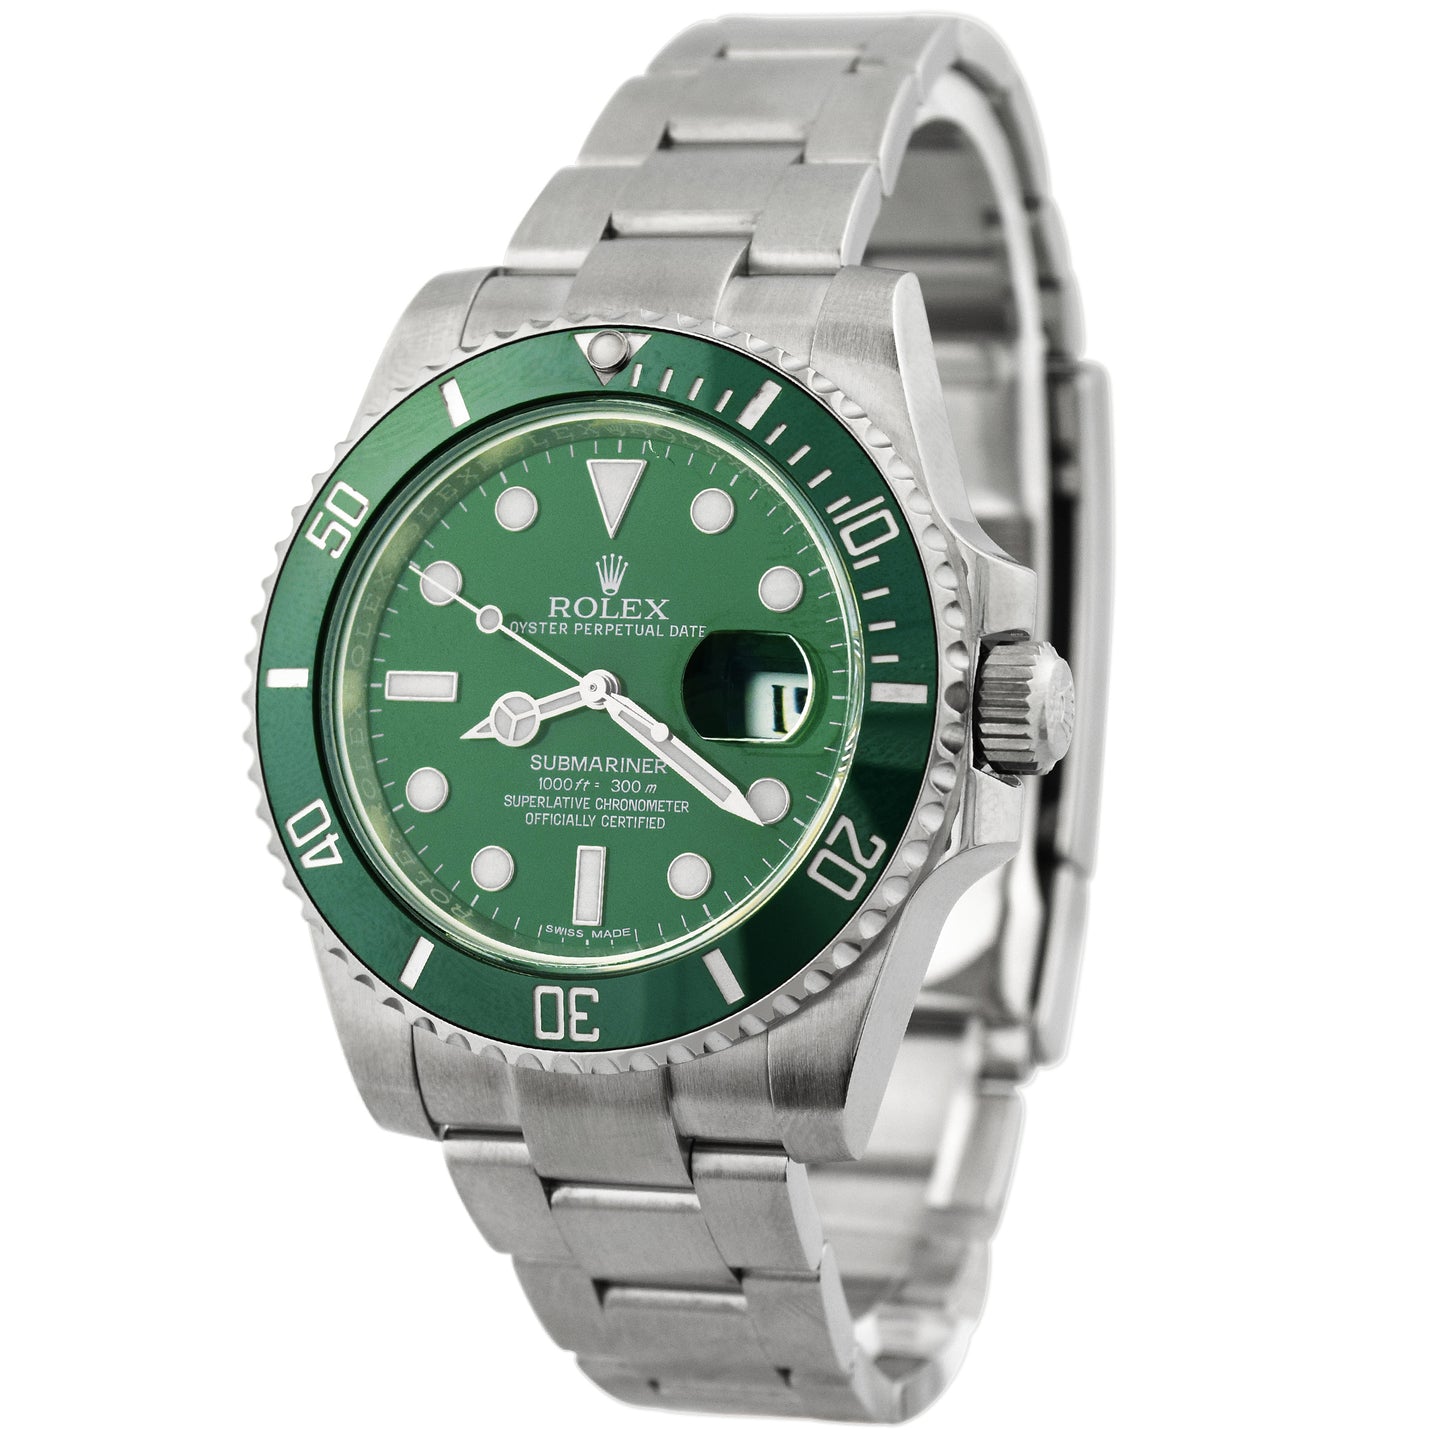 Rolex Men's Submariner "Hulk" Stainless Steel 40mm Green Dot Dial Watch Reference #: 116610LV